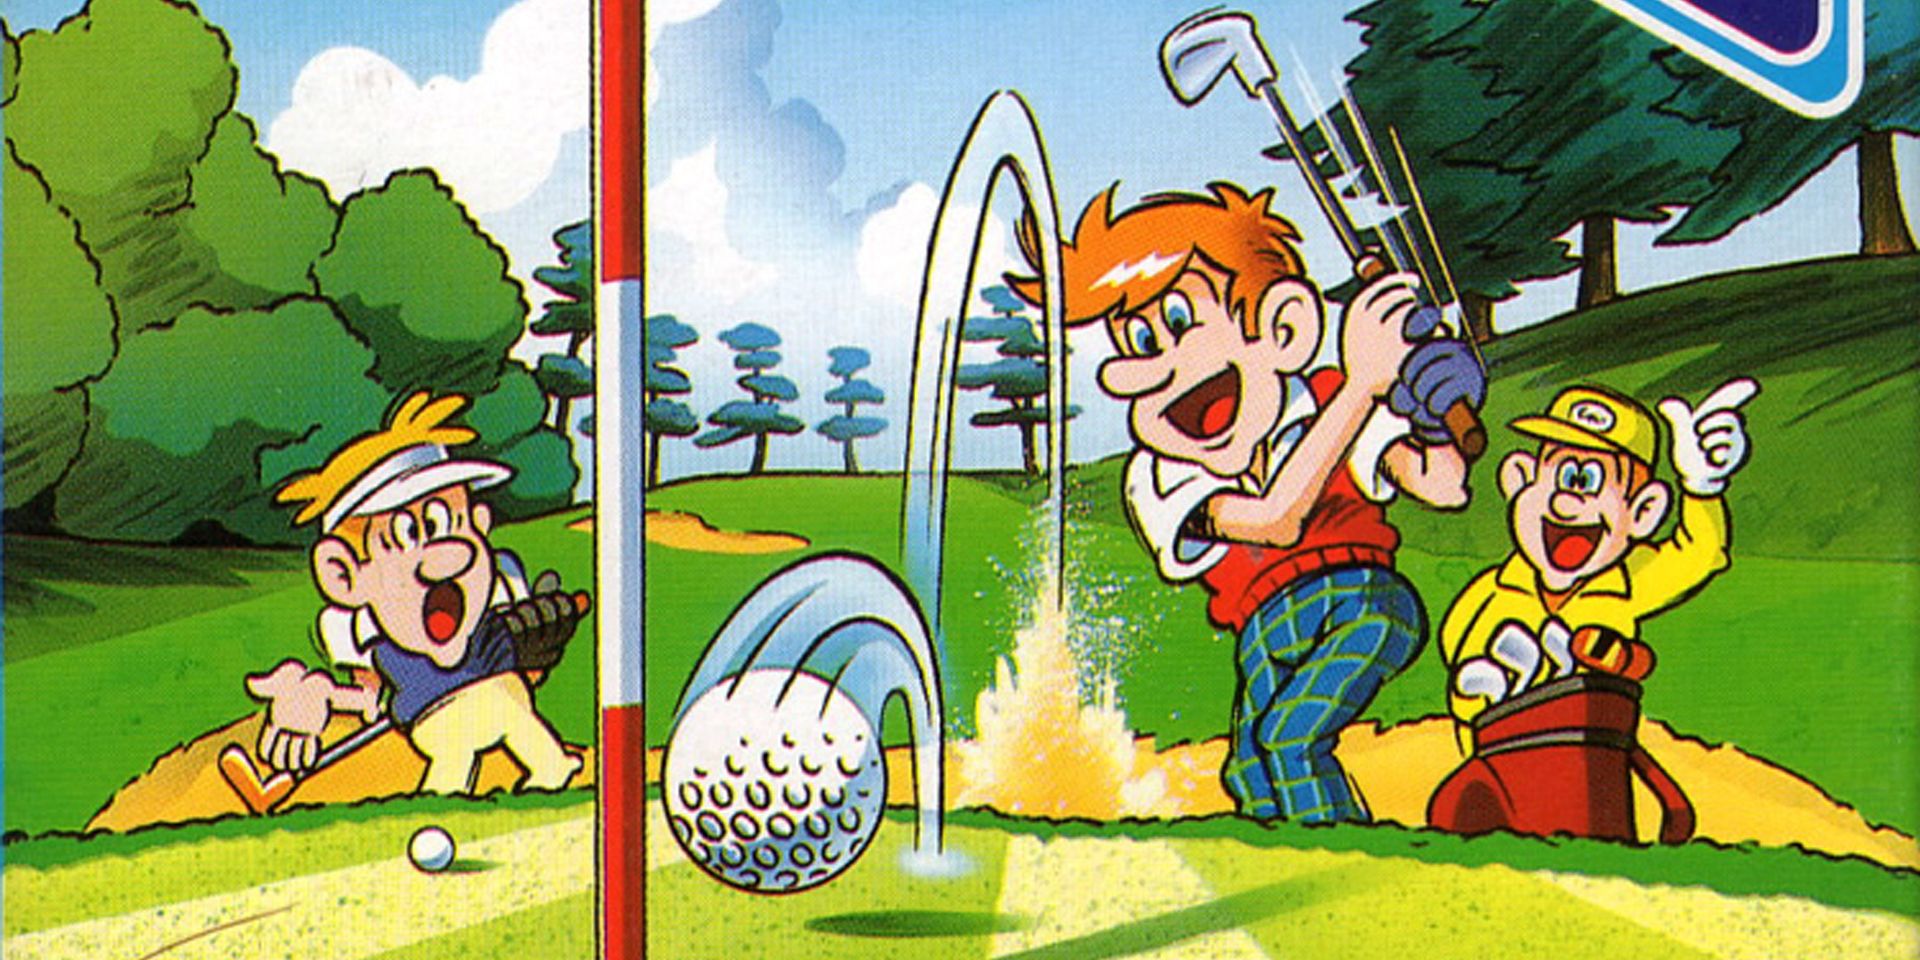 Some characters play golf in a Mario game.